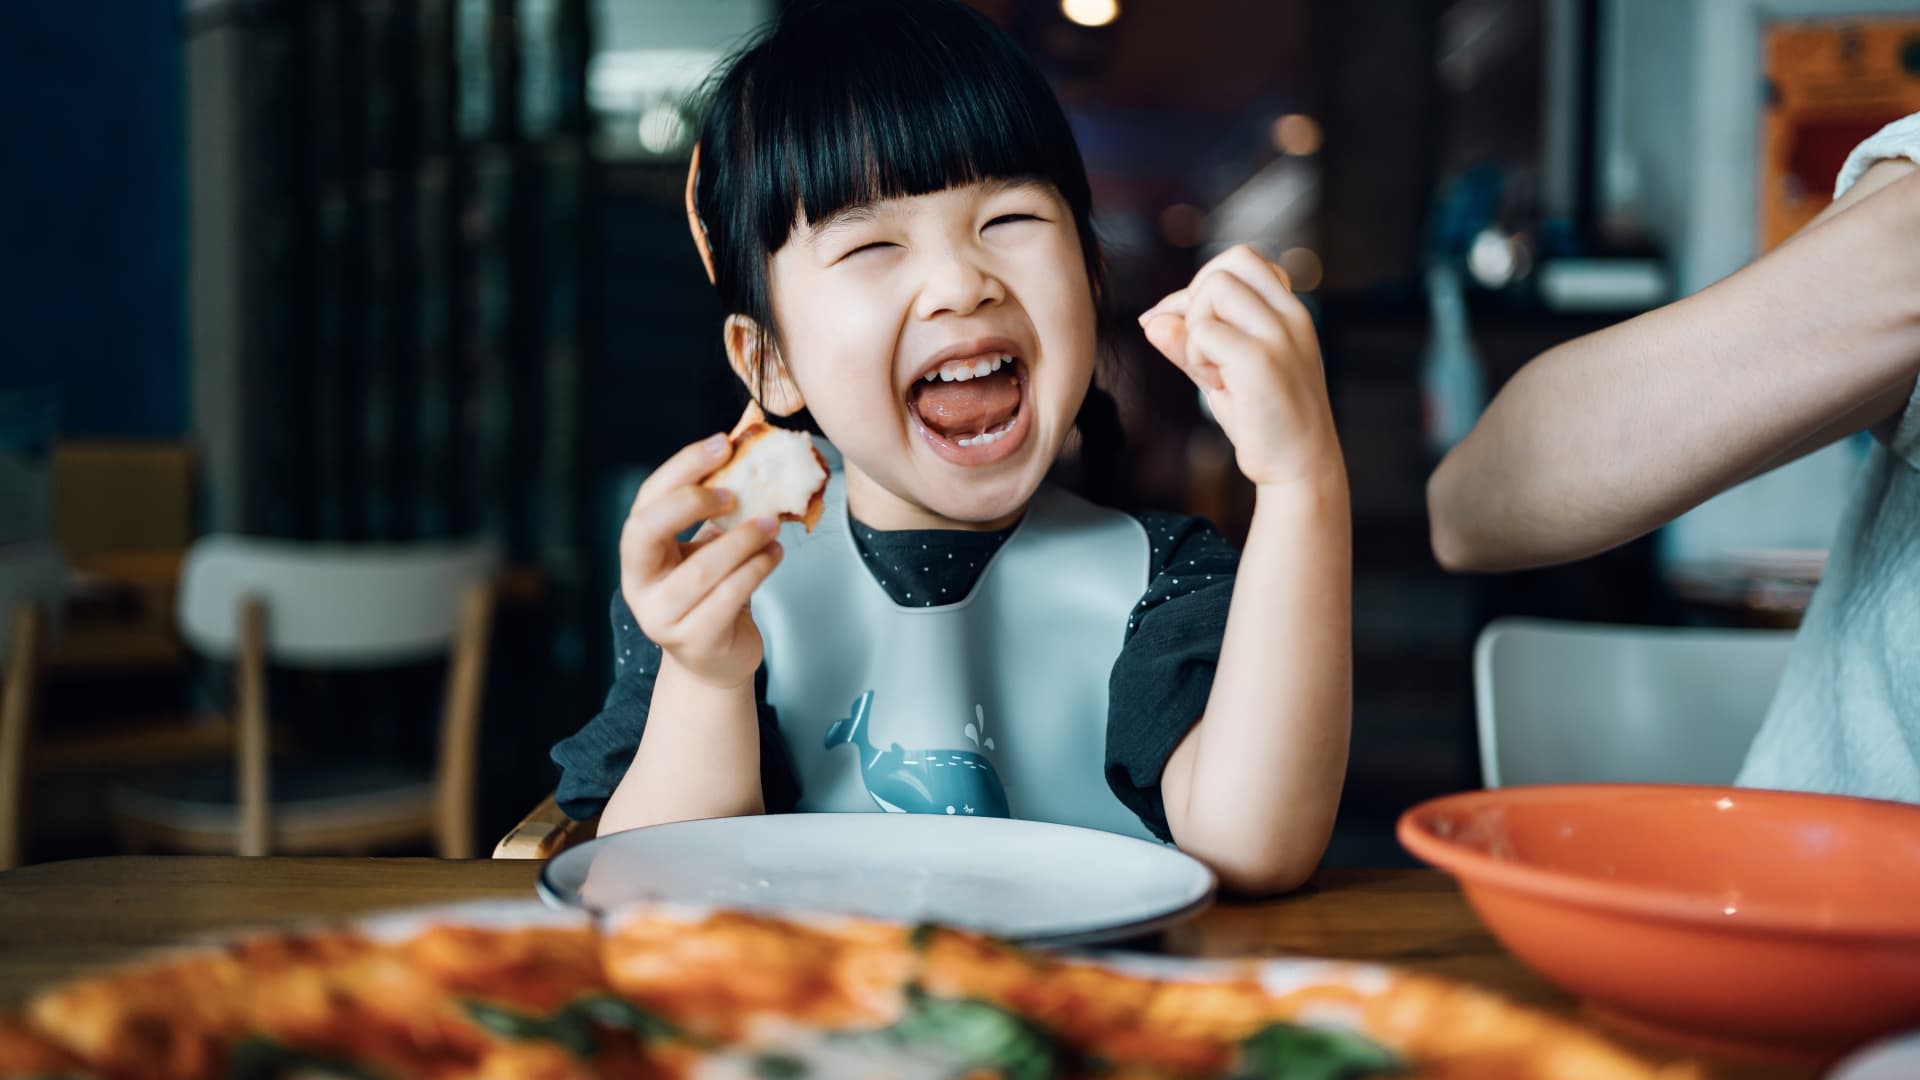 Never use these 4 ‘toxic’ food phrases if your kid is a picky eater, says parenting expert and dietitian